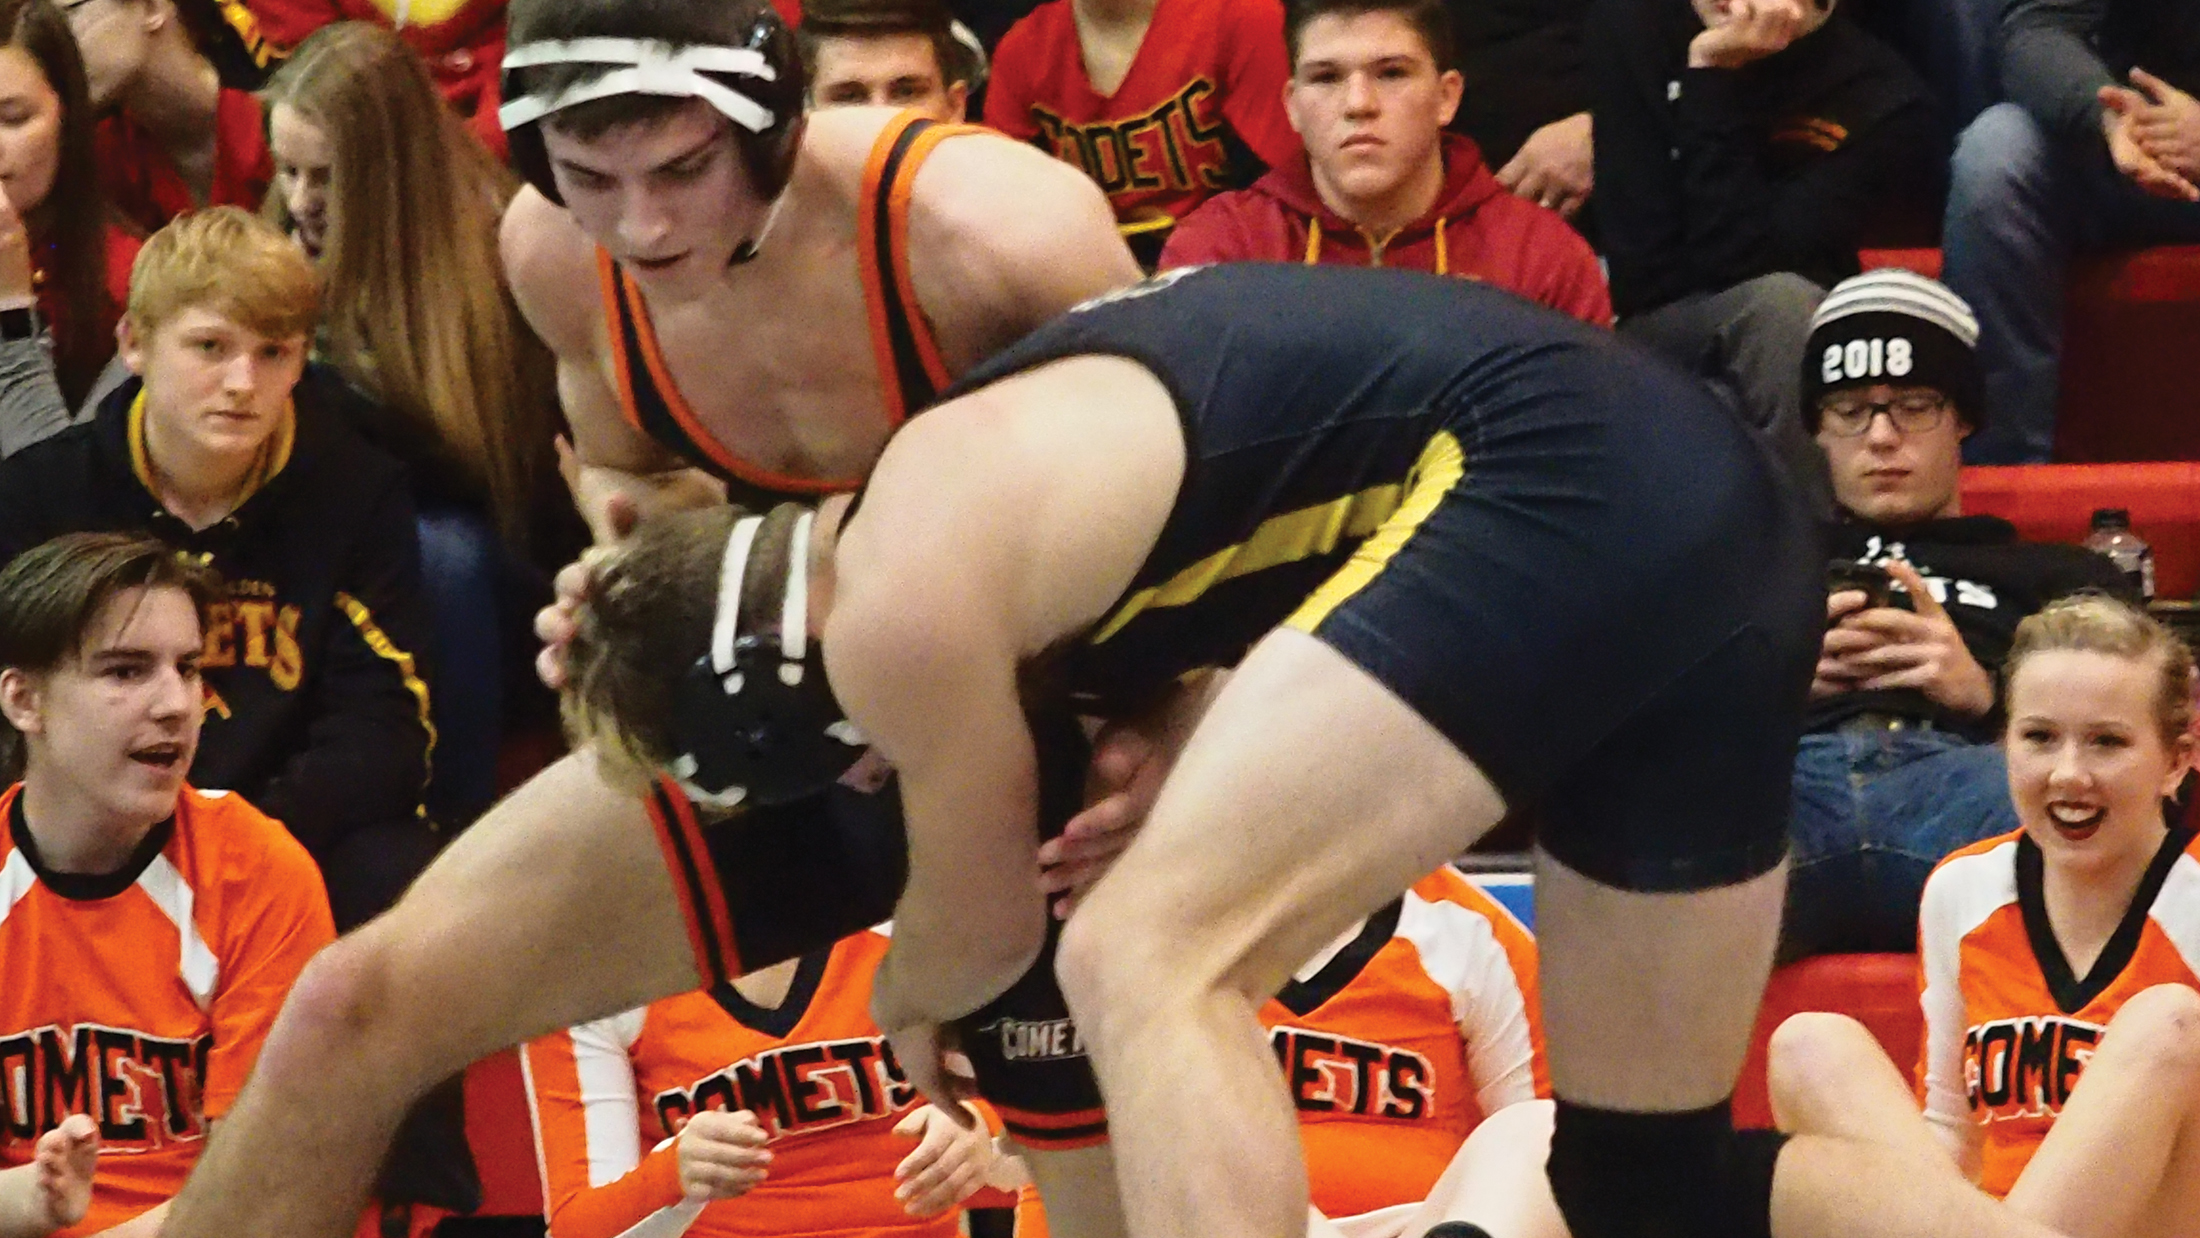 Three Comet wrestlers advance to state championships